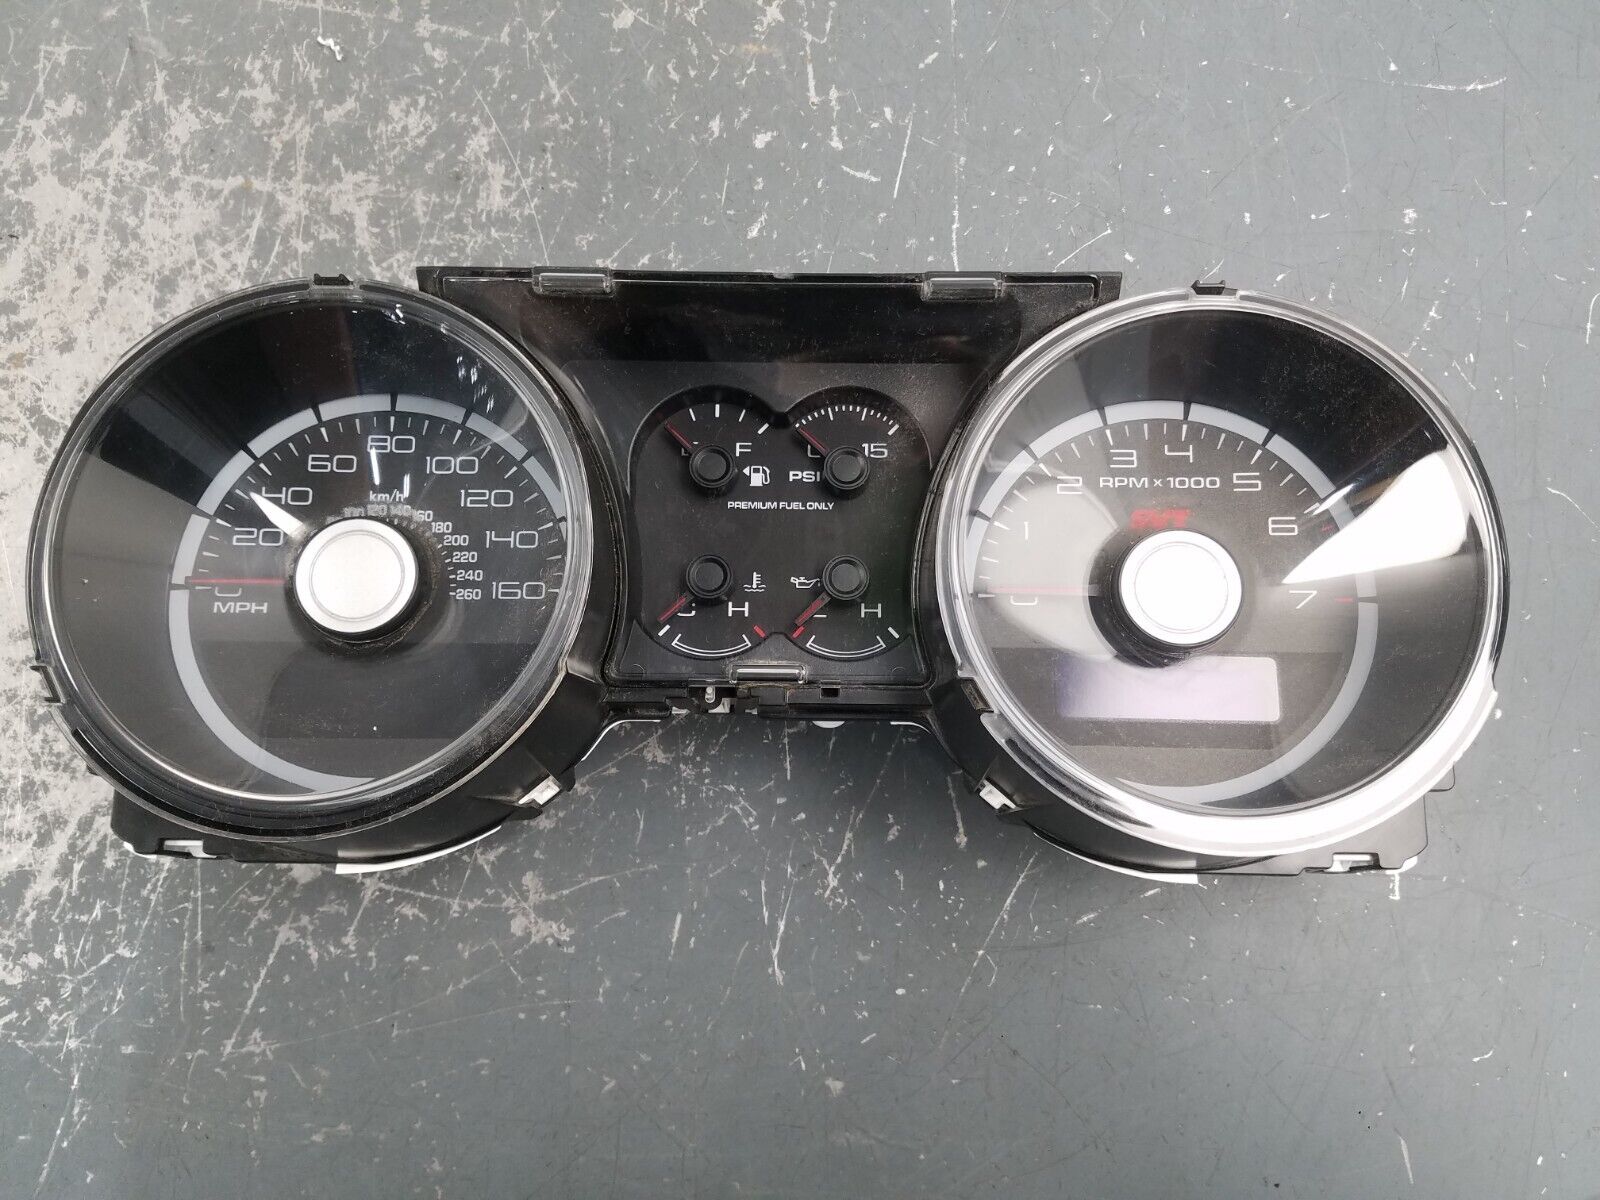 2011 Ford Mustang Shelby GT500 Gauge Cluster #0887 Q6